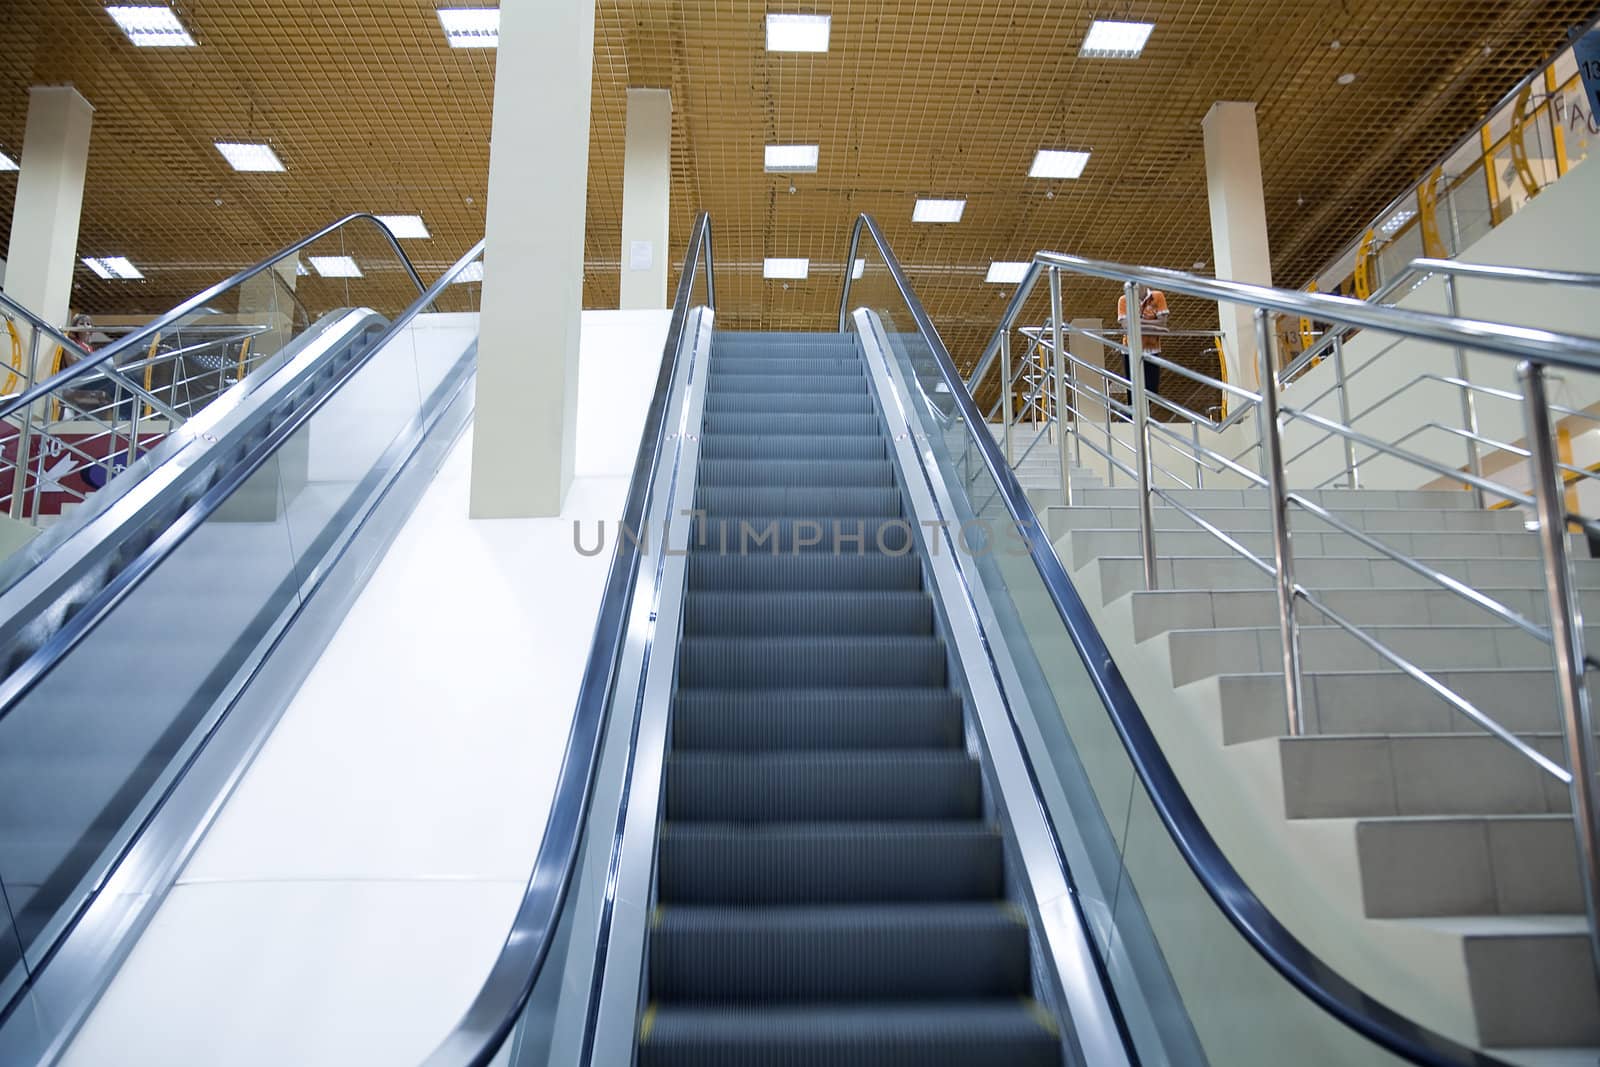 moving escalator of modern large shopping centre or the airport